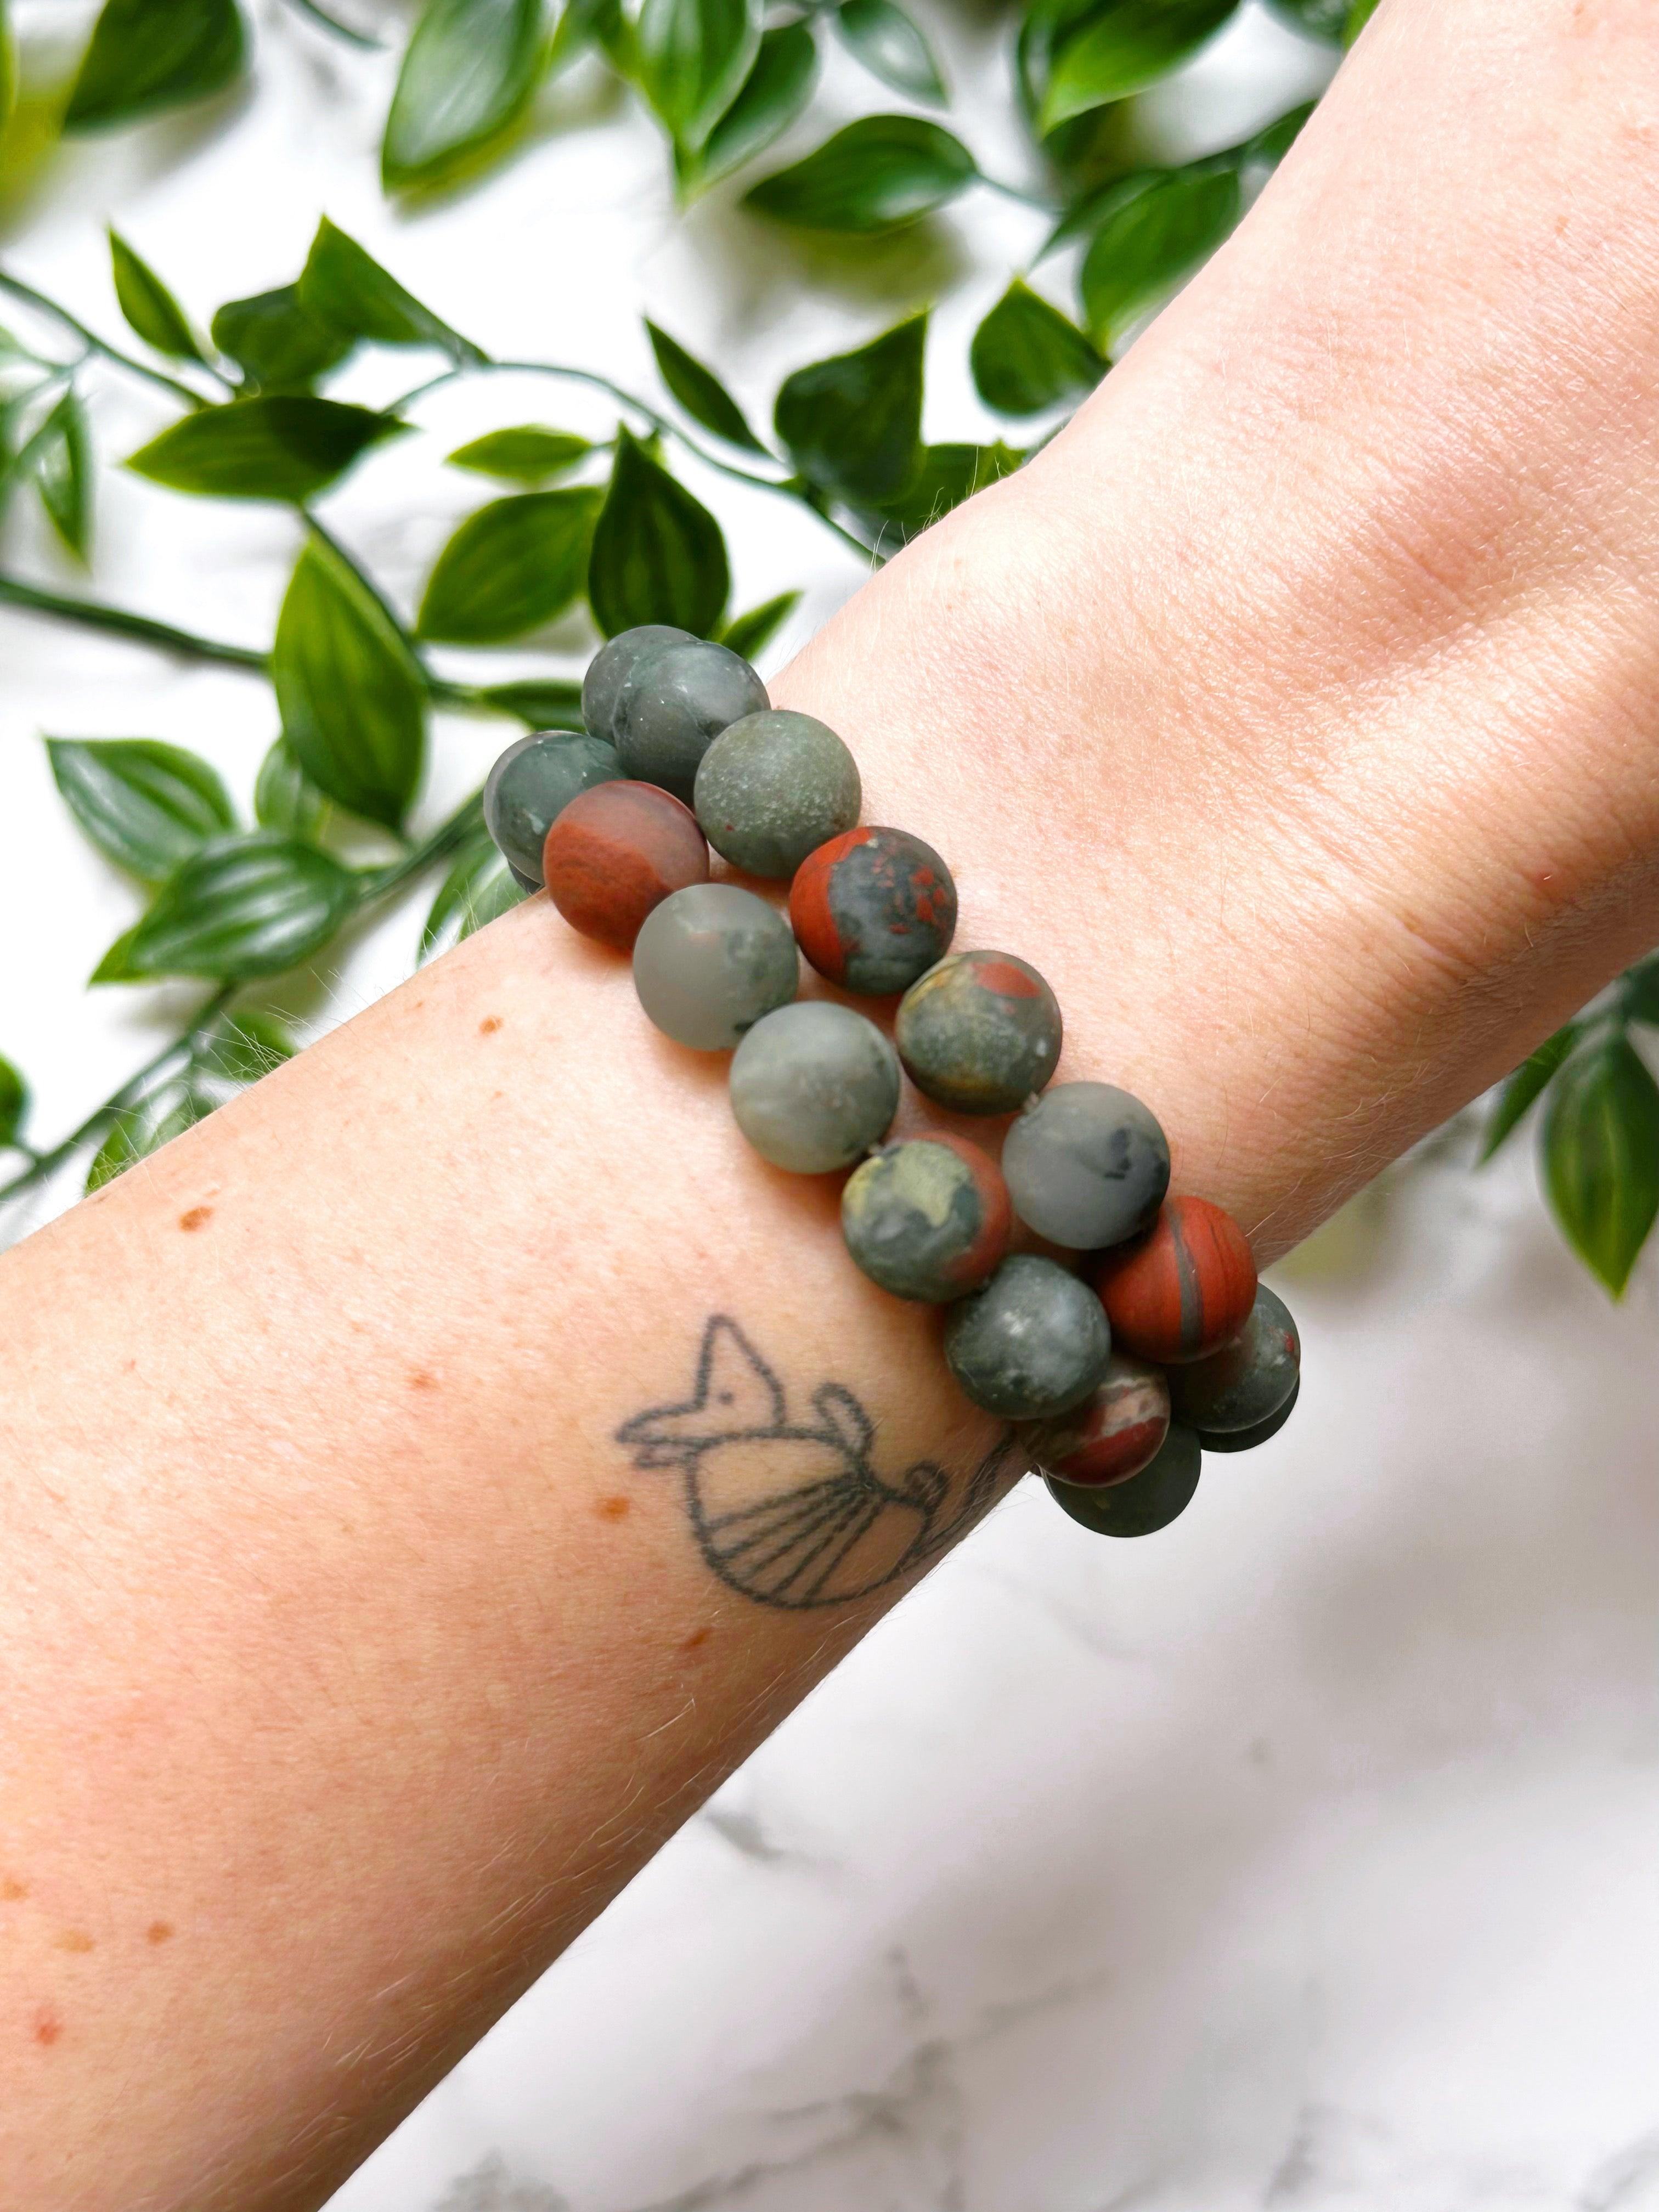 AFRICAN BLOODSTONE (MATTE) 10mm - HANDMADE CRYSTAL BRACELET - 10mm, African bloodstone, Aries, aries stack, bracelet, crystal bracelet, earth, emotional support, handmade bracelet, jewelry, june wrist candy, libra, libra stack, market bracelet, matte, mixed colors, pisces, pisces stack, protection gift bundle, recently added, restocked, scorpio stack, summer wrist candy, Wearable - The Mineral Maven